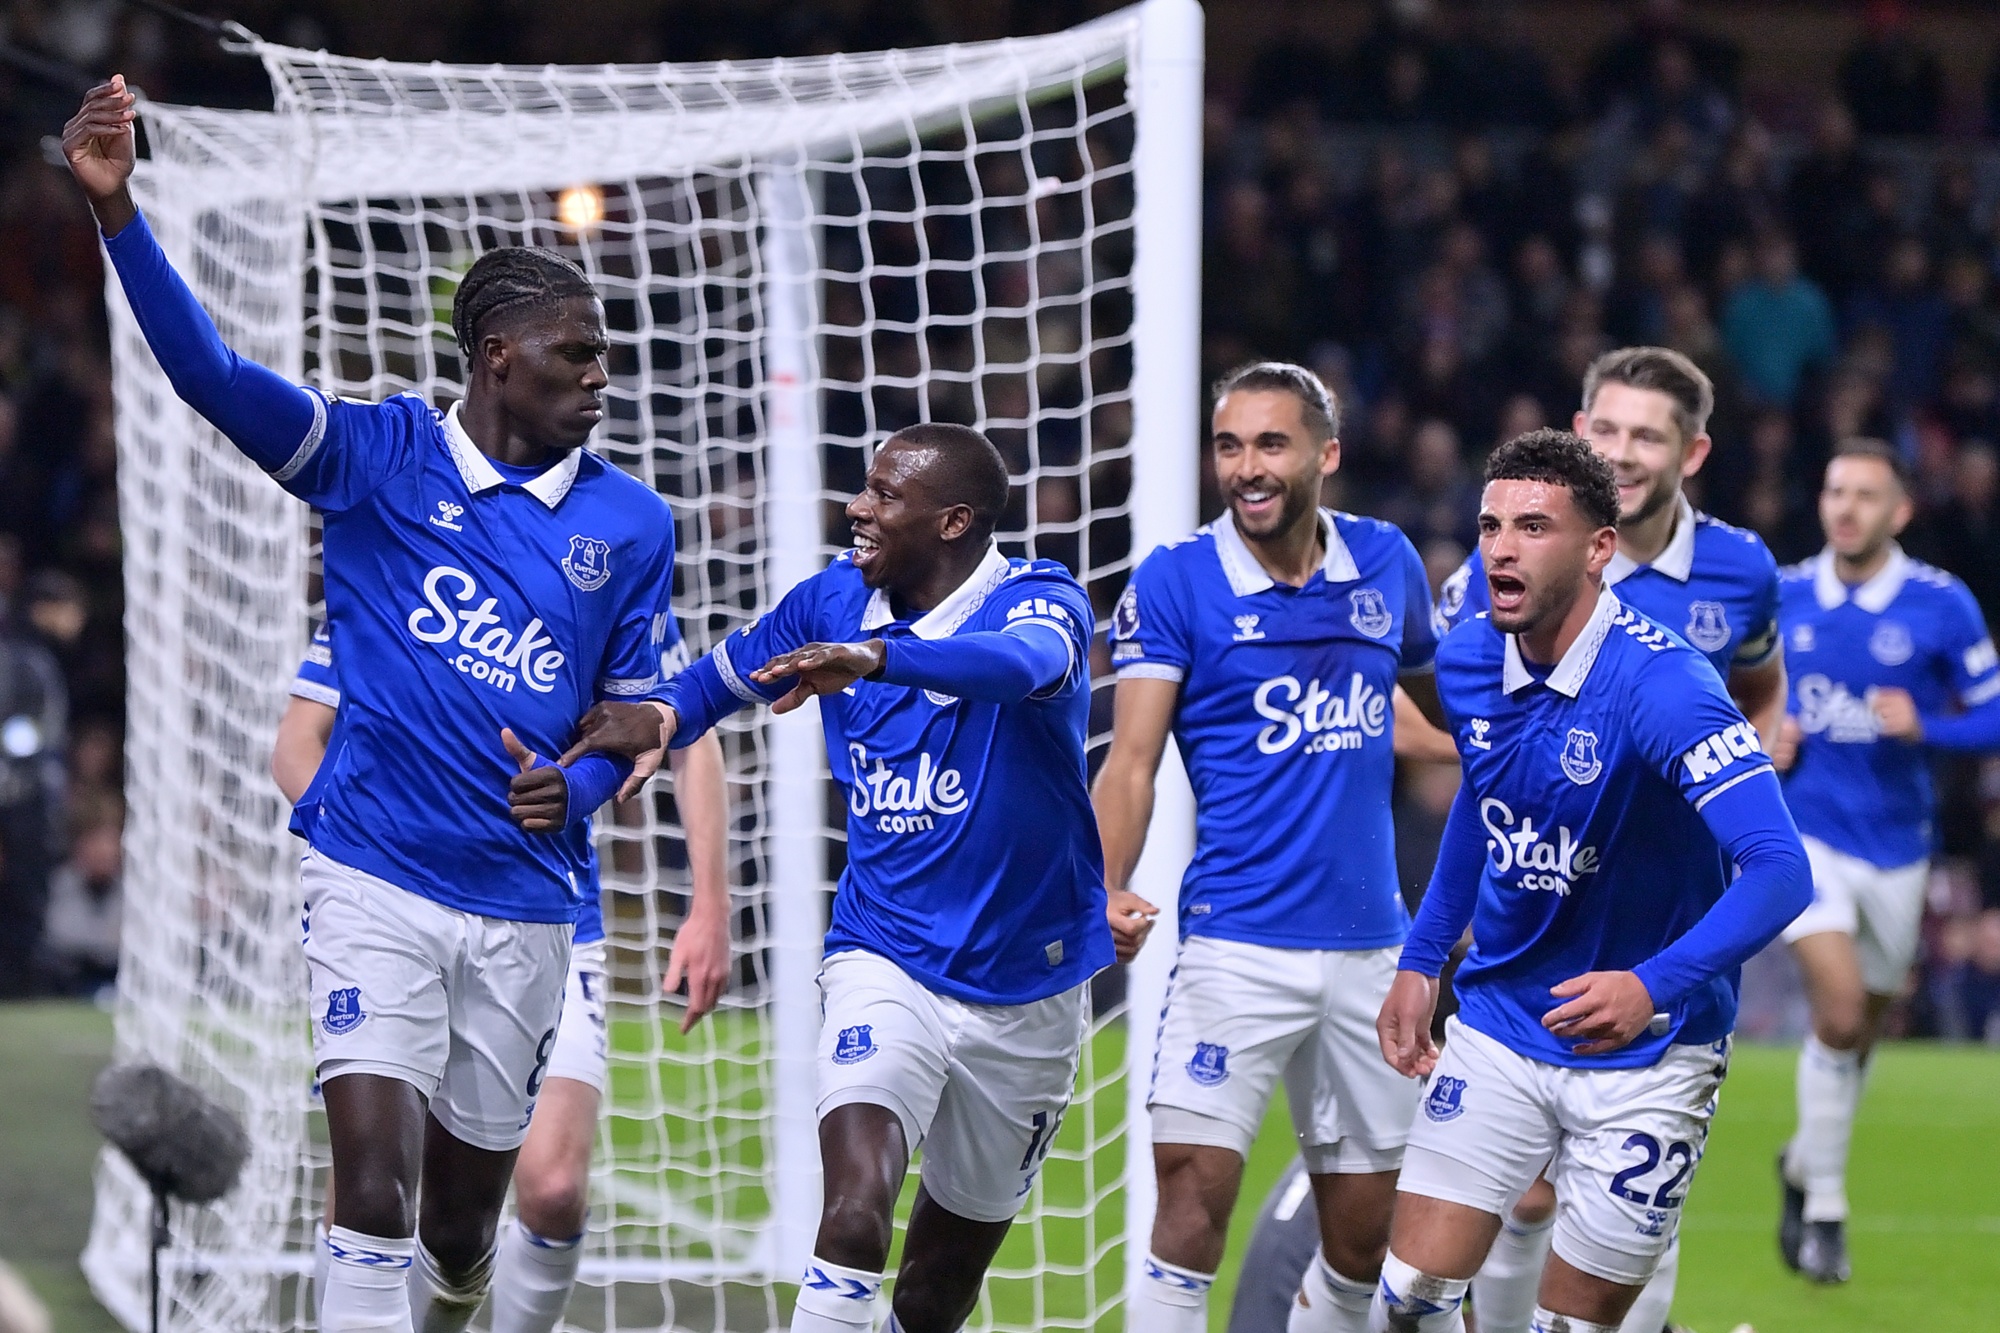 Everton to drop lucrative deal with gambling giant two years early